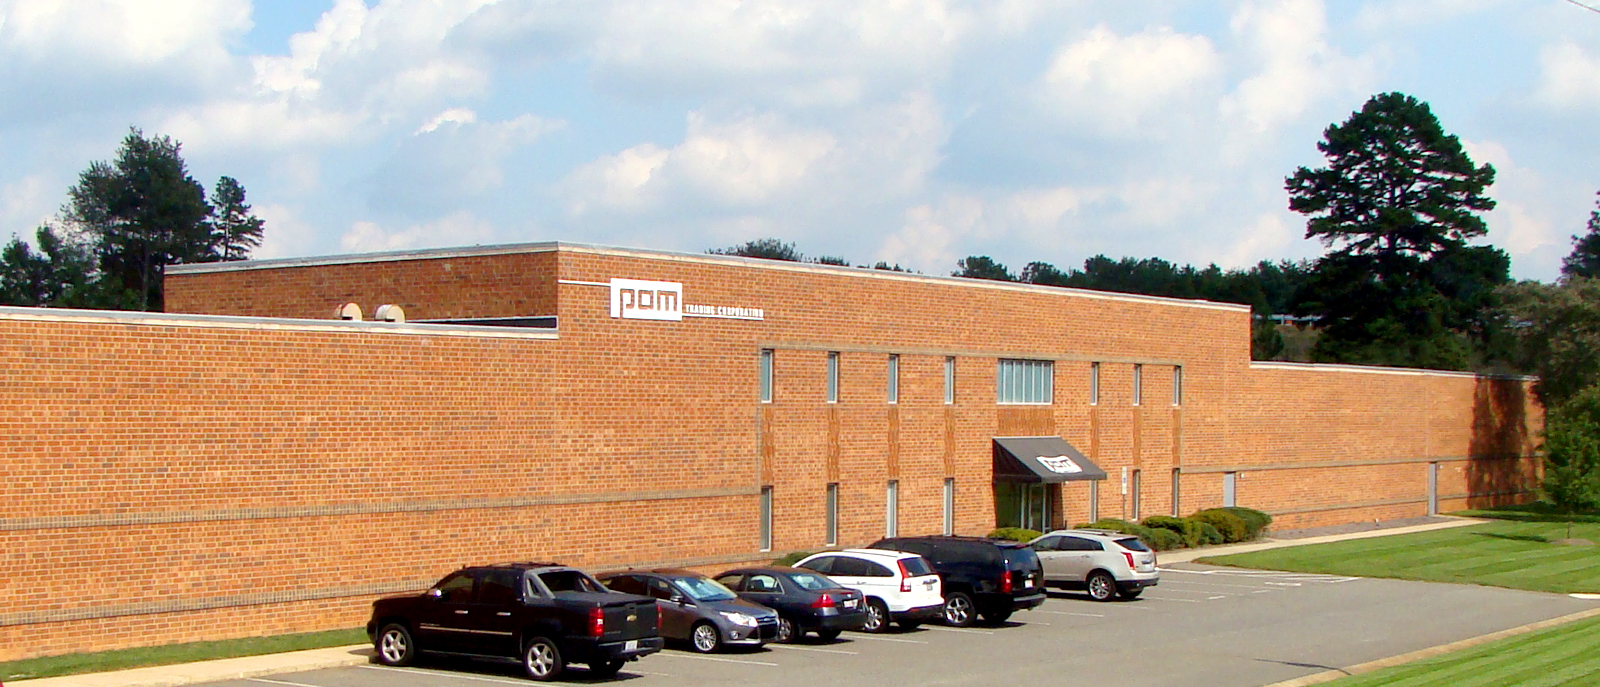 Pam Trading Corporation located Kernersville NC